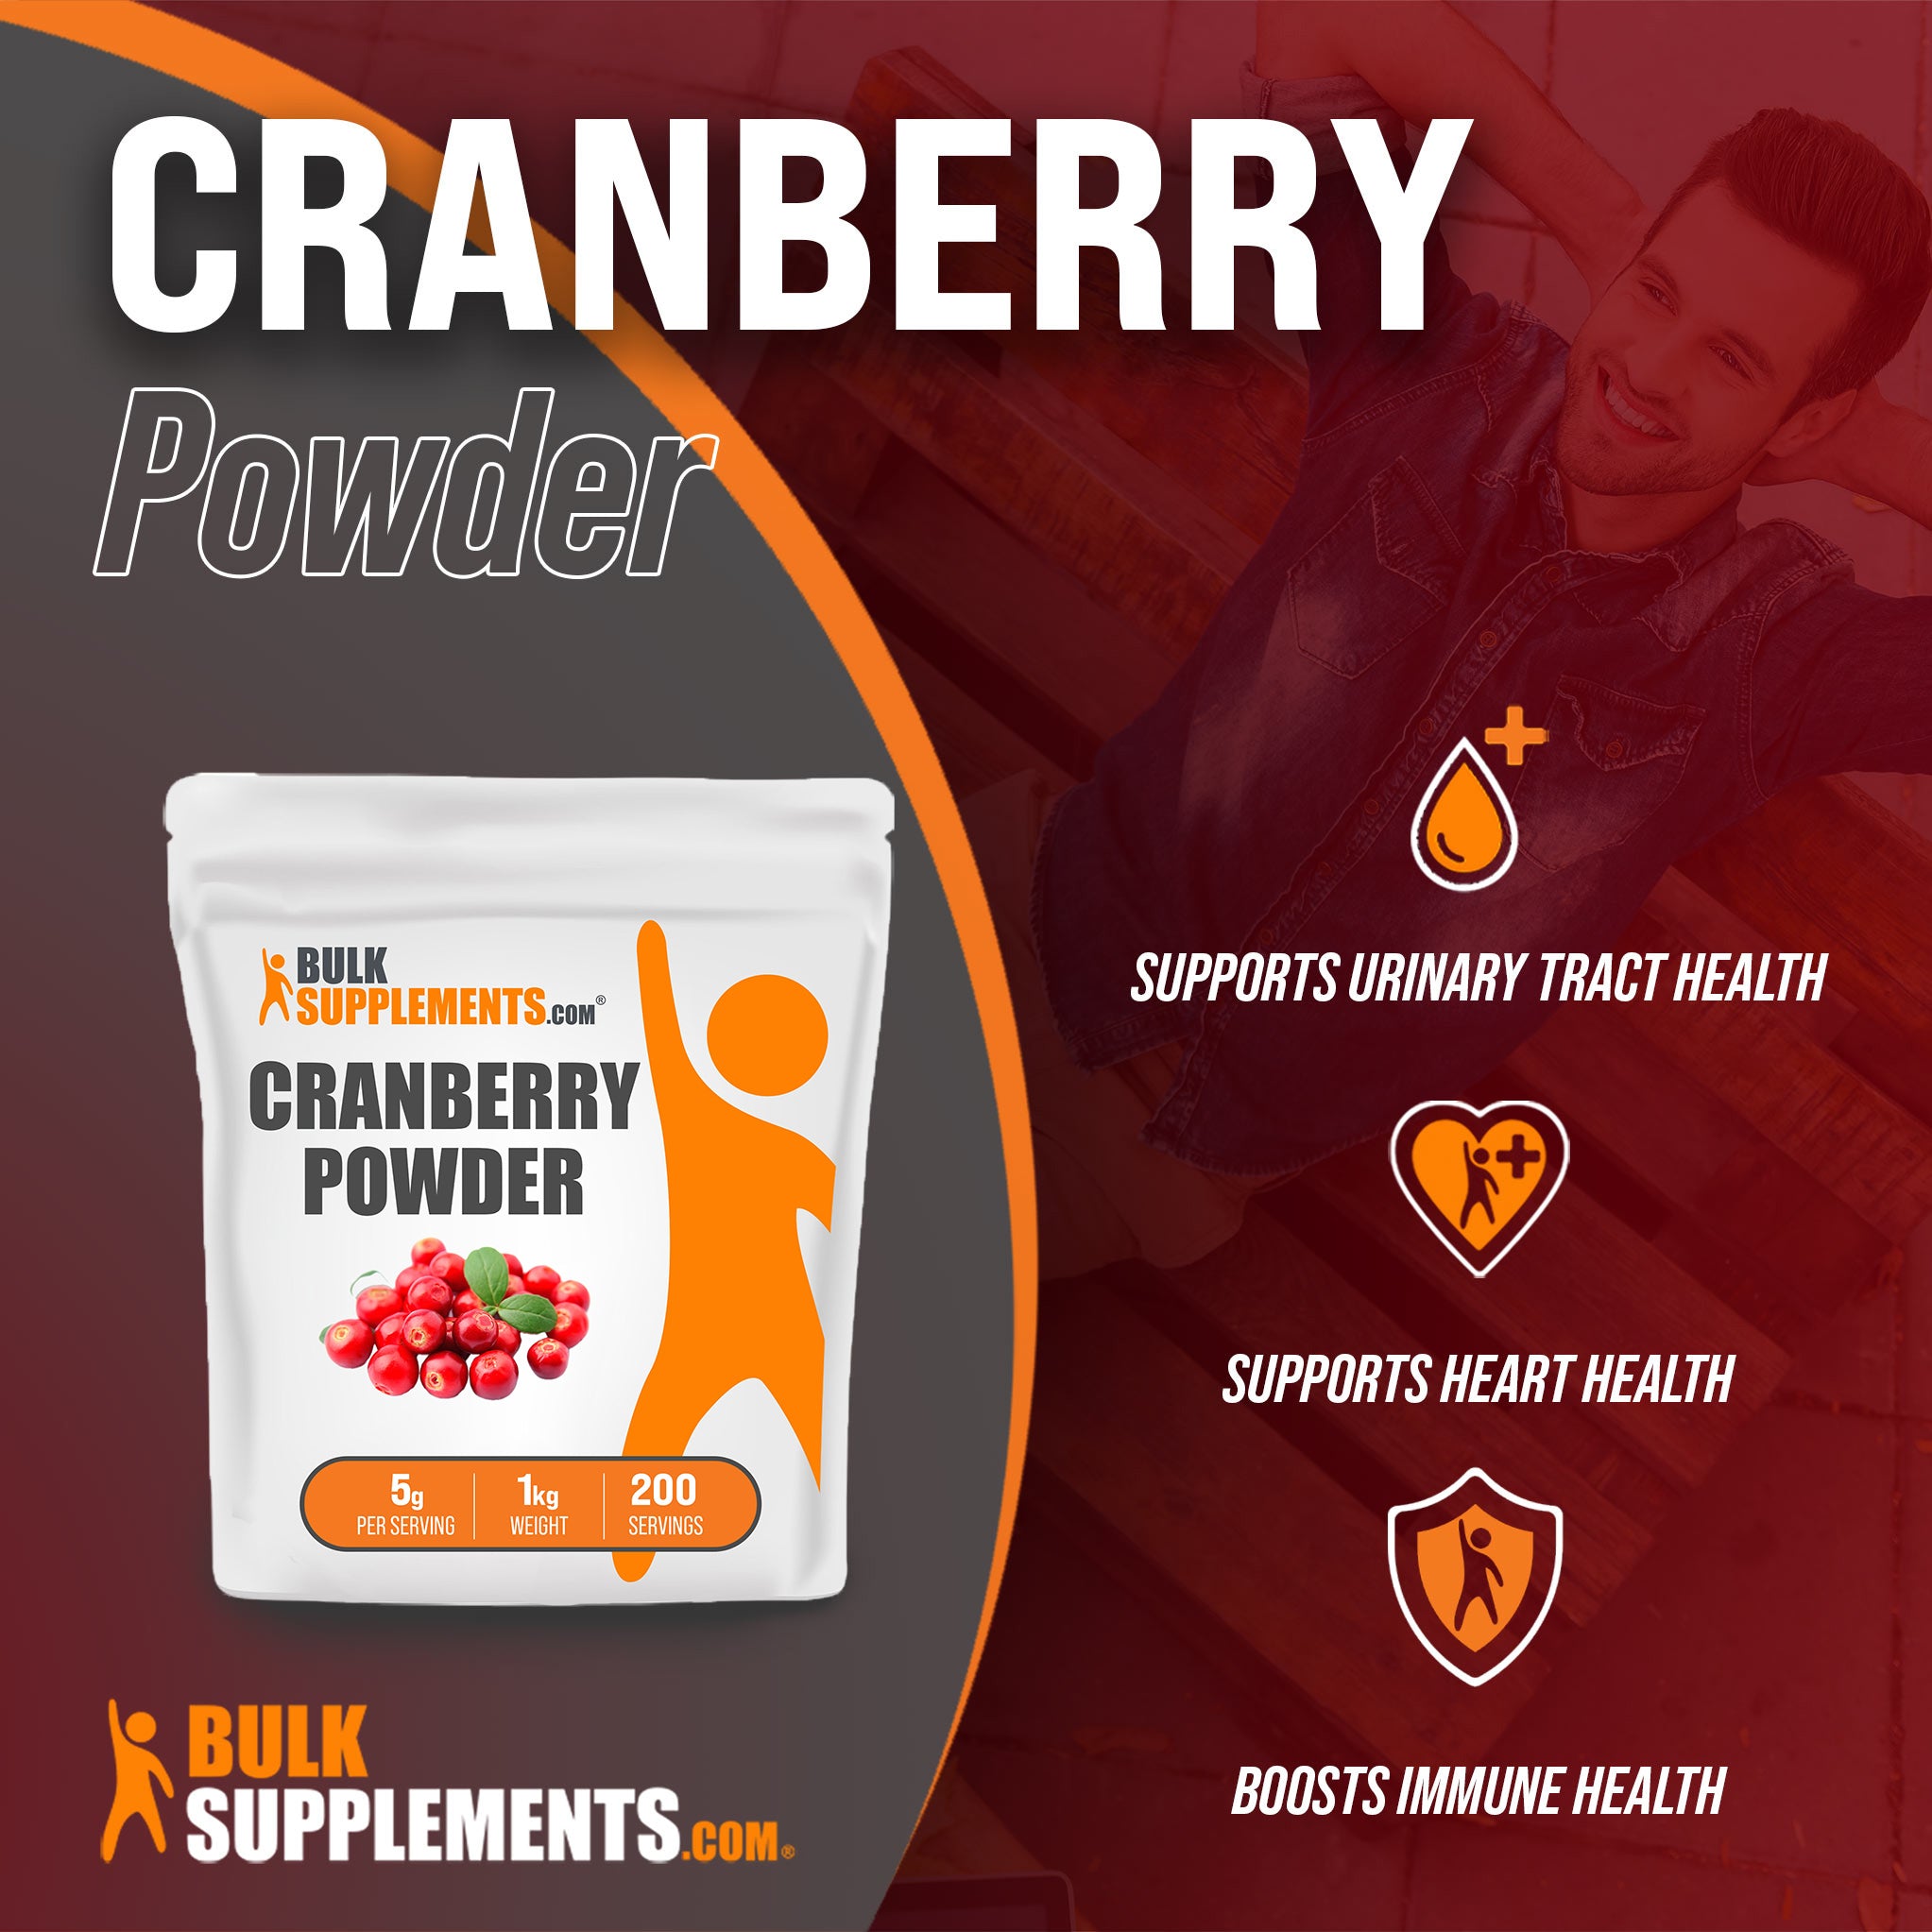 Benefits of Cranberry Powder; supports urinary tract health, supports heart health, boosts immune health